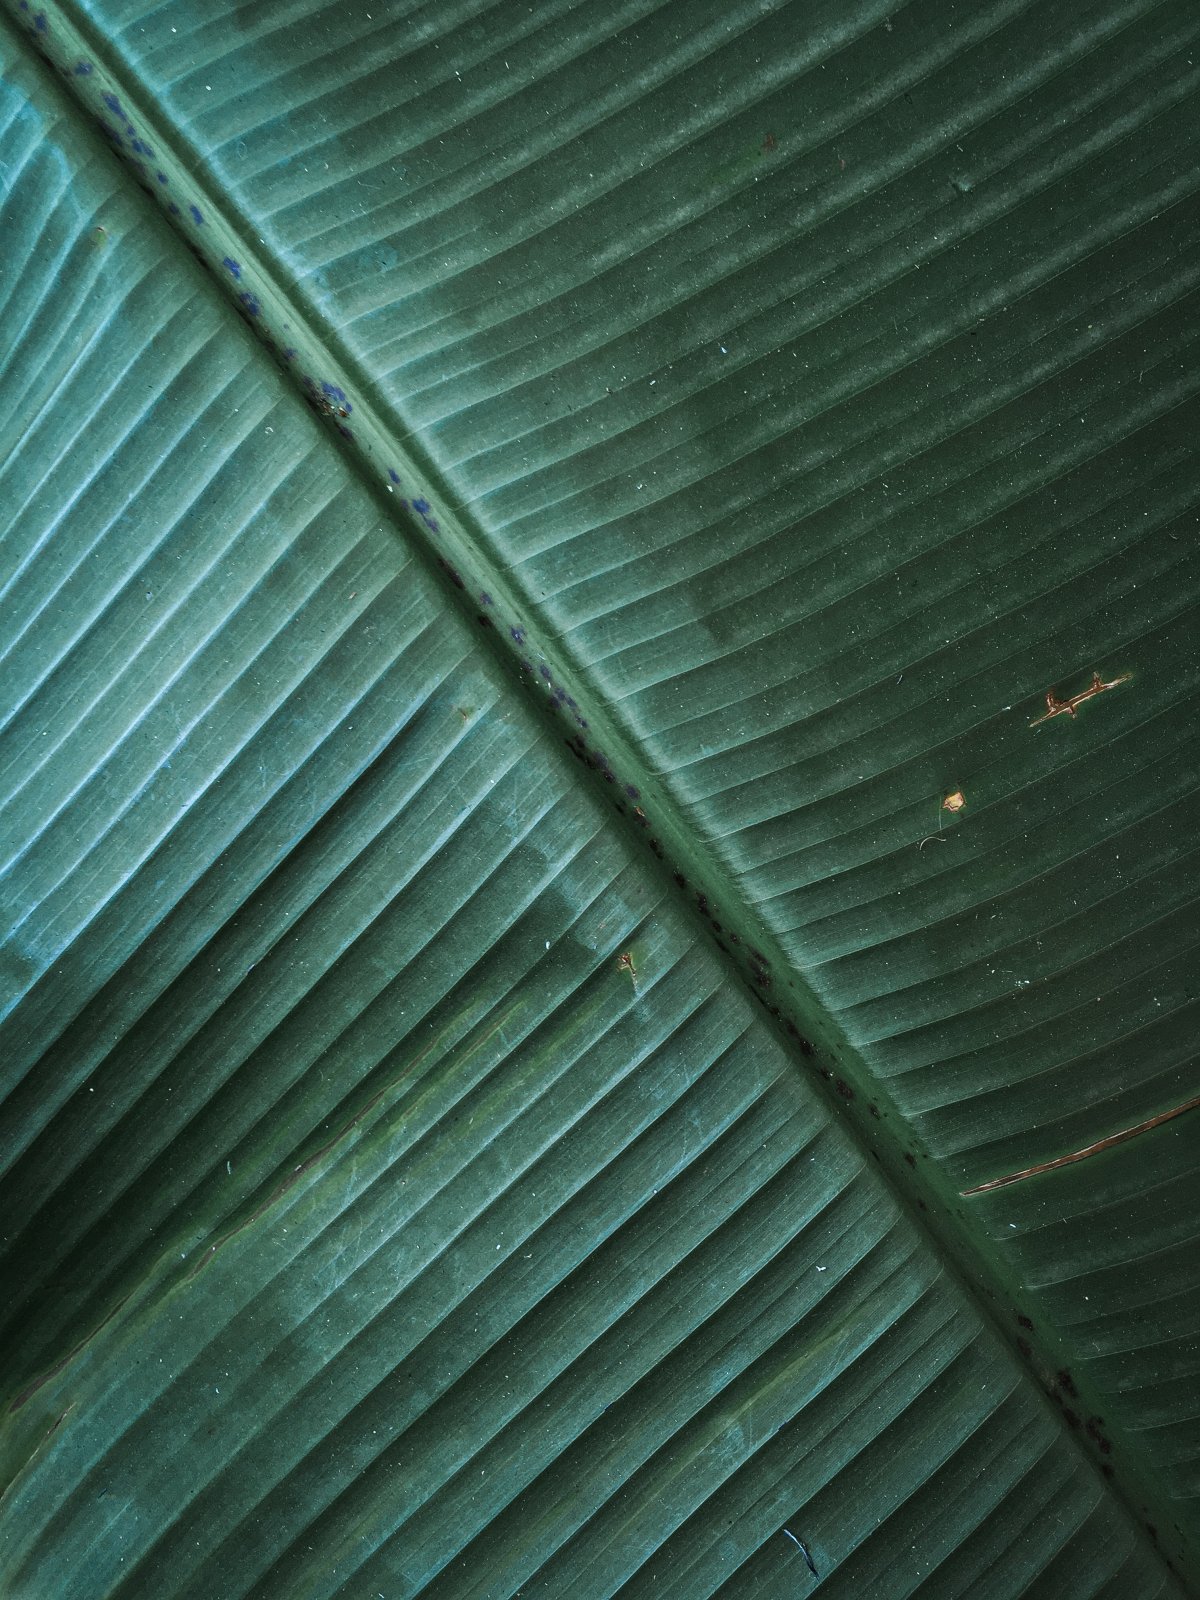 Partial close-up picture of banana leaf